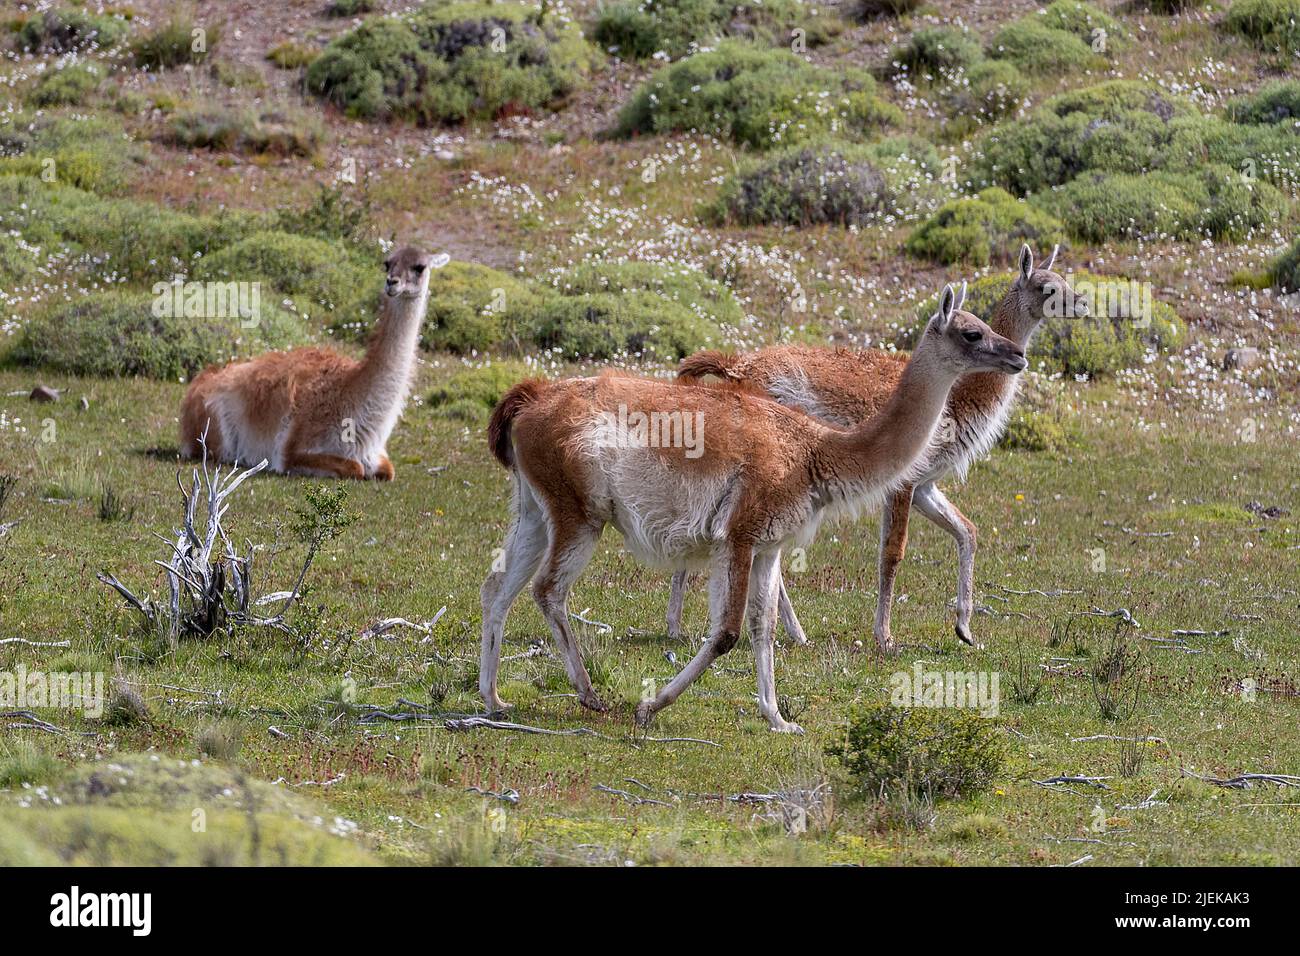 Guanacos (Lama guanicoe) from Torres del Paine National Park, southern Chile. Stock Photo